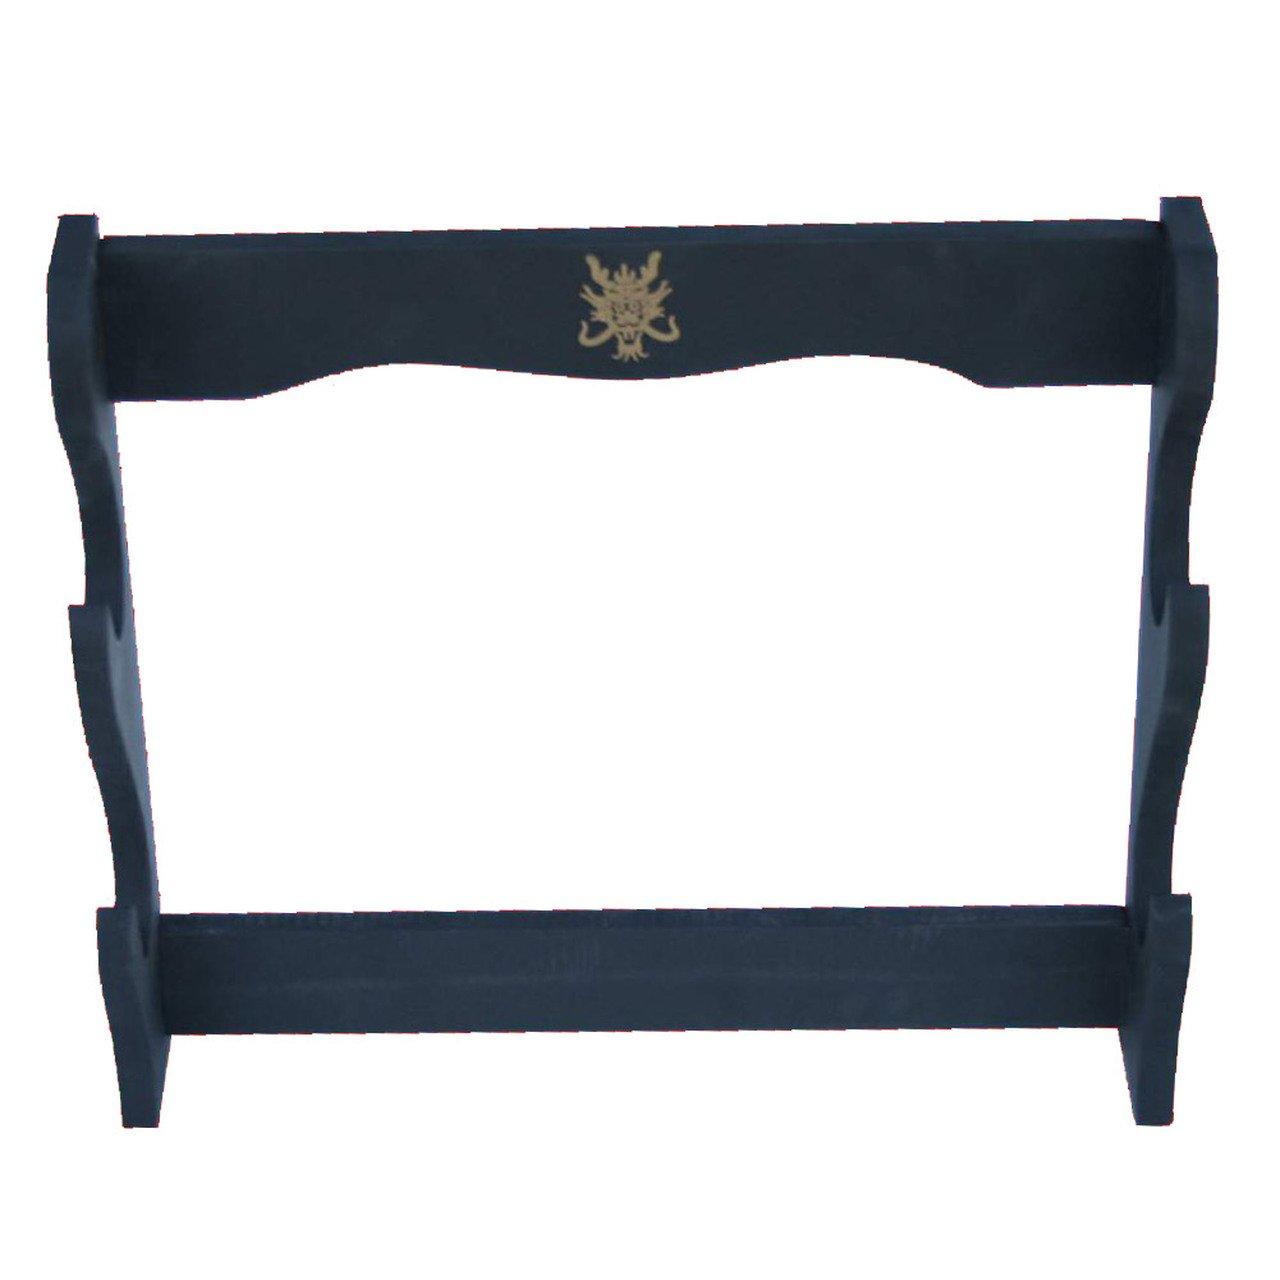 Two Tier Sword Stand Display Dual Purpose-1